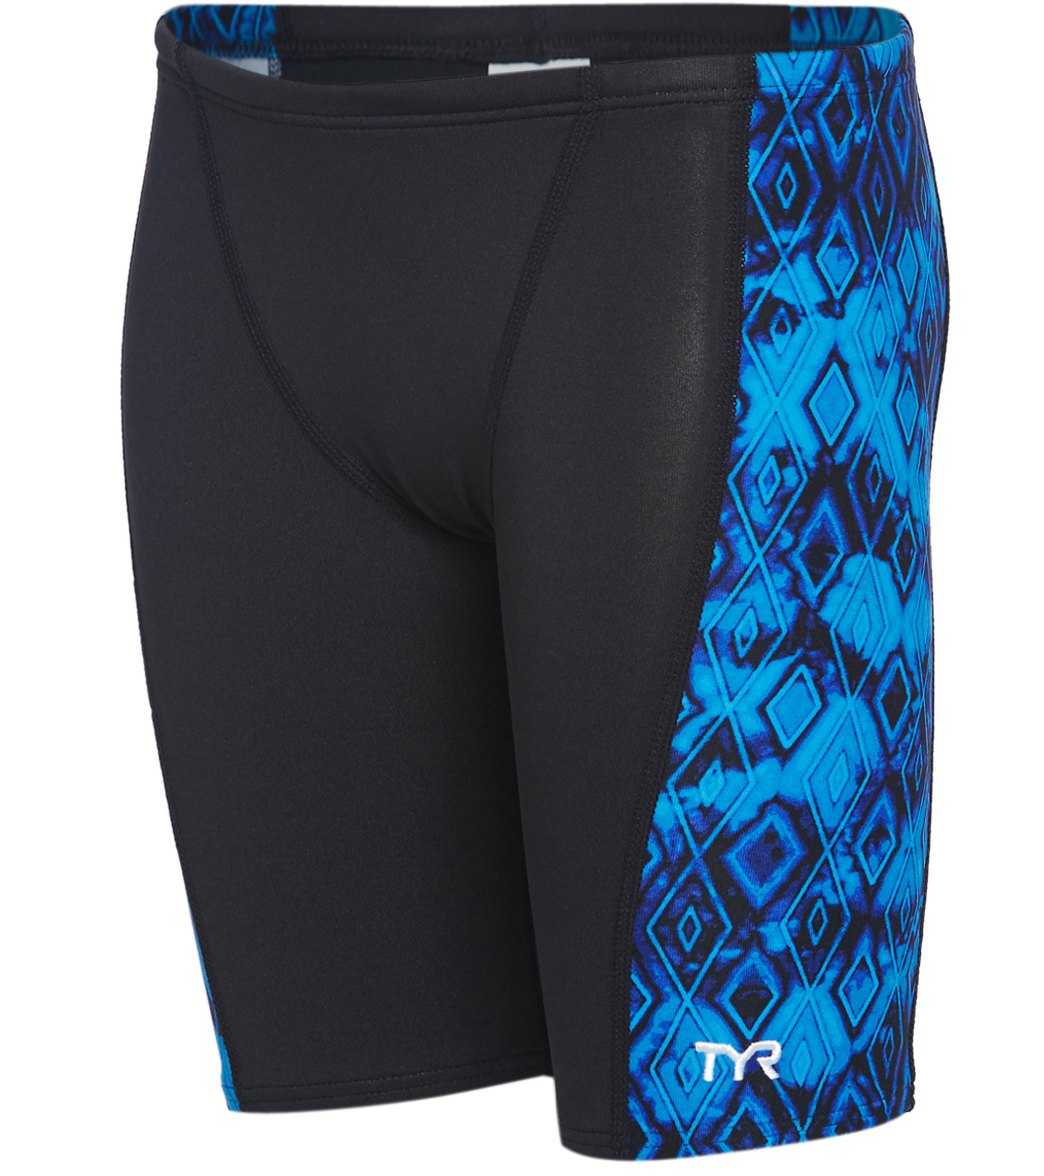 TYR Boys' Glacial Hero Jammer Swimsuit at SwimOutlet.com - Free Shipping